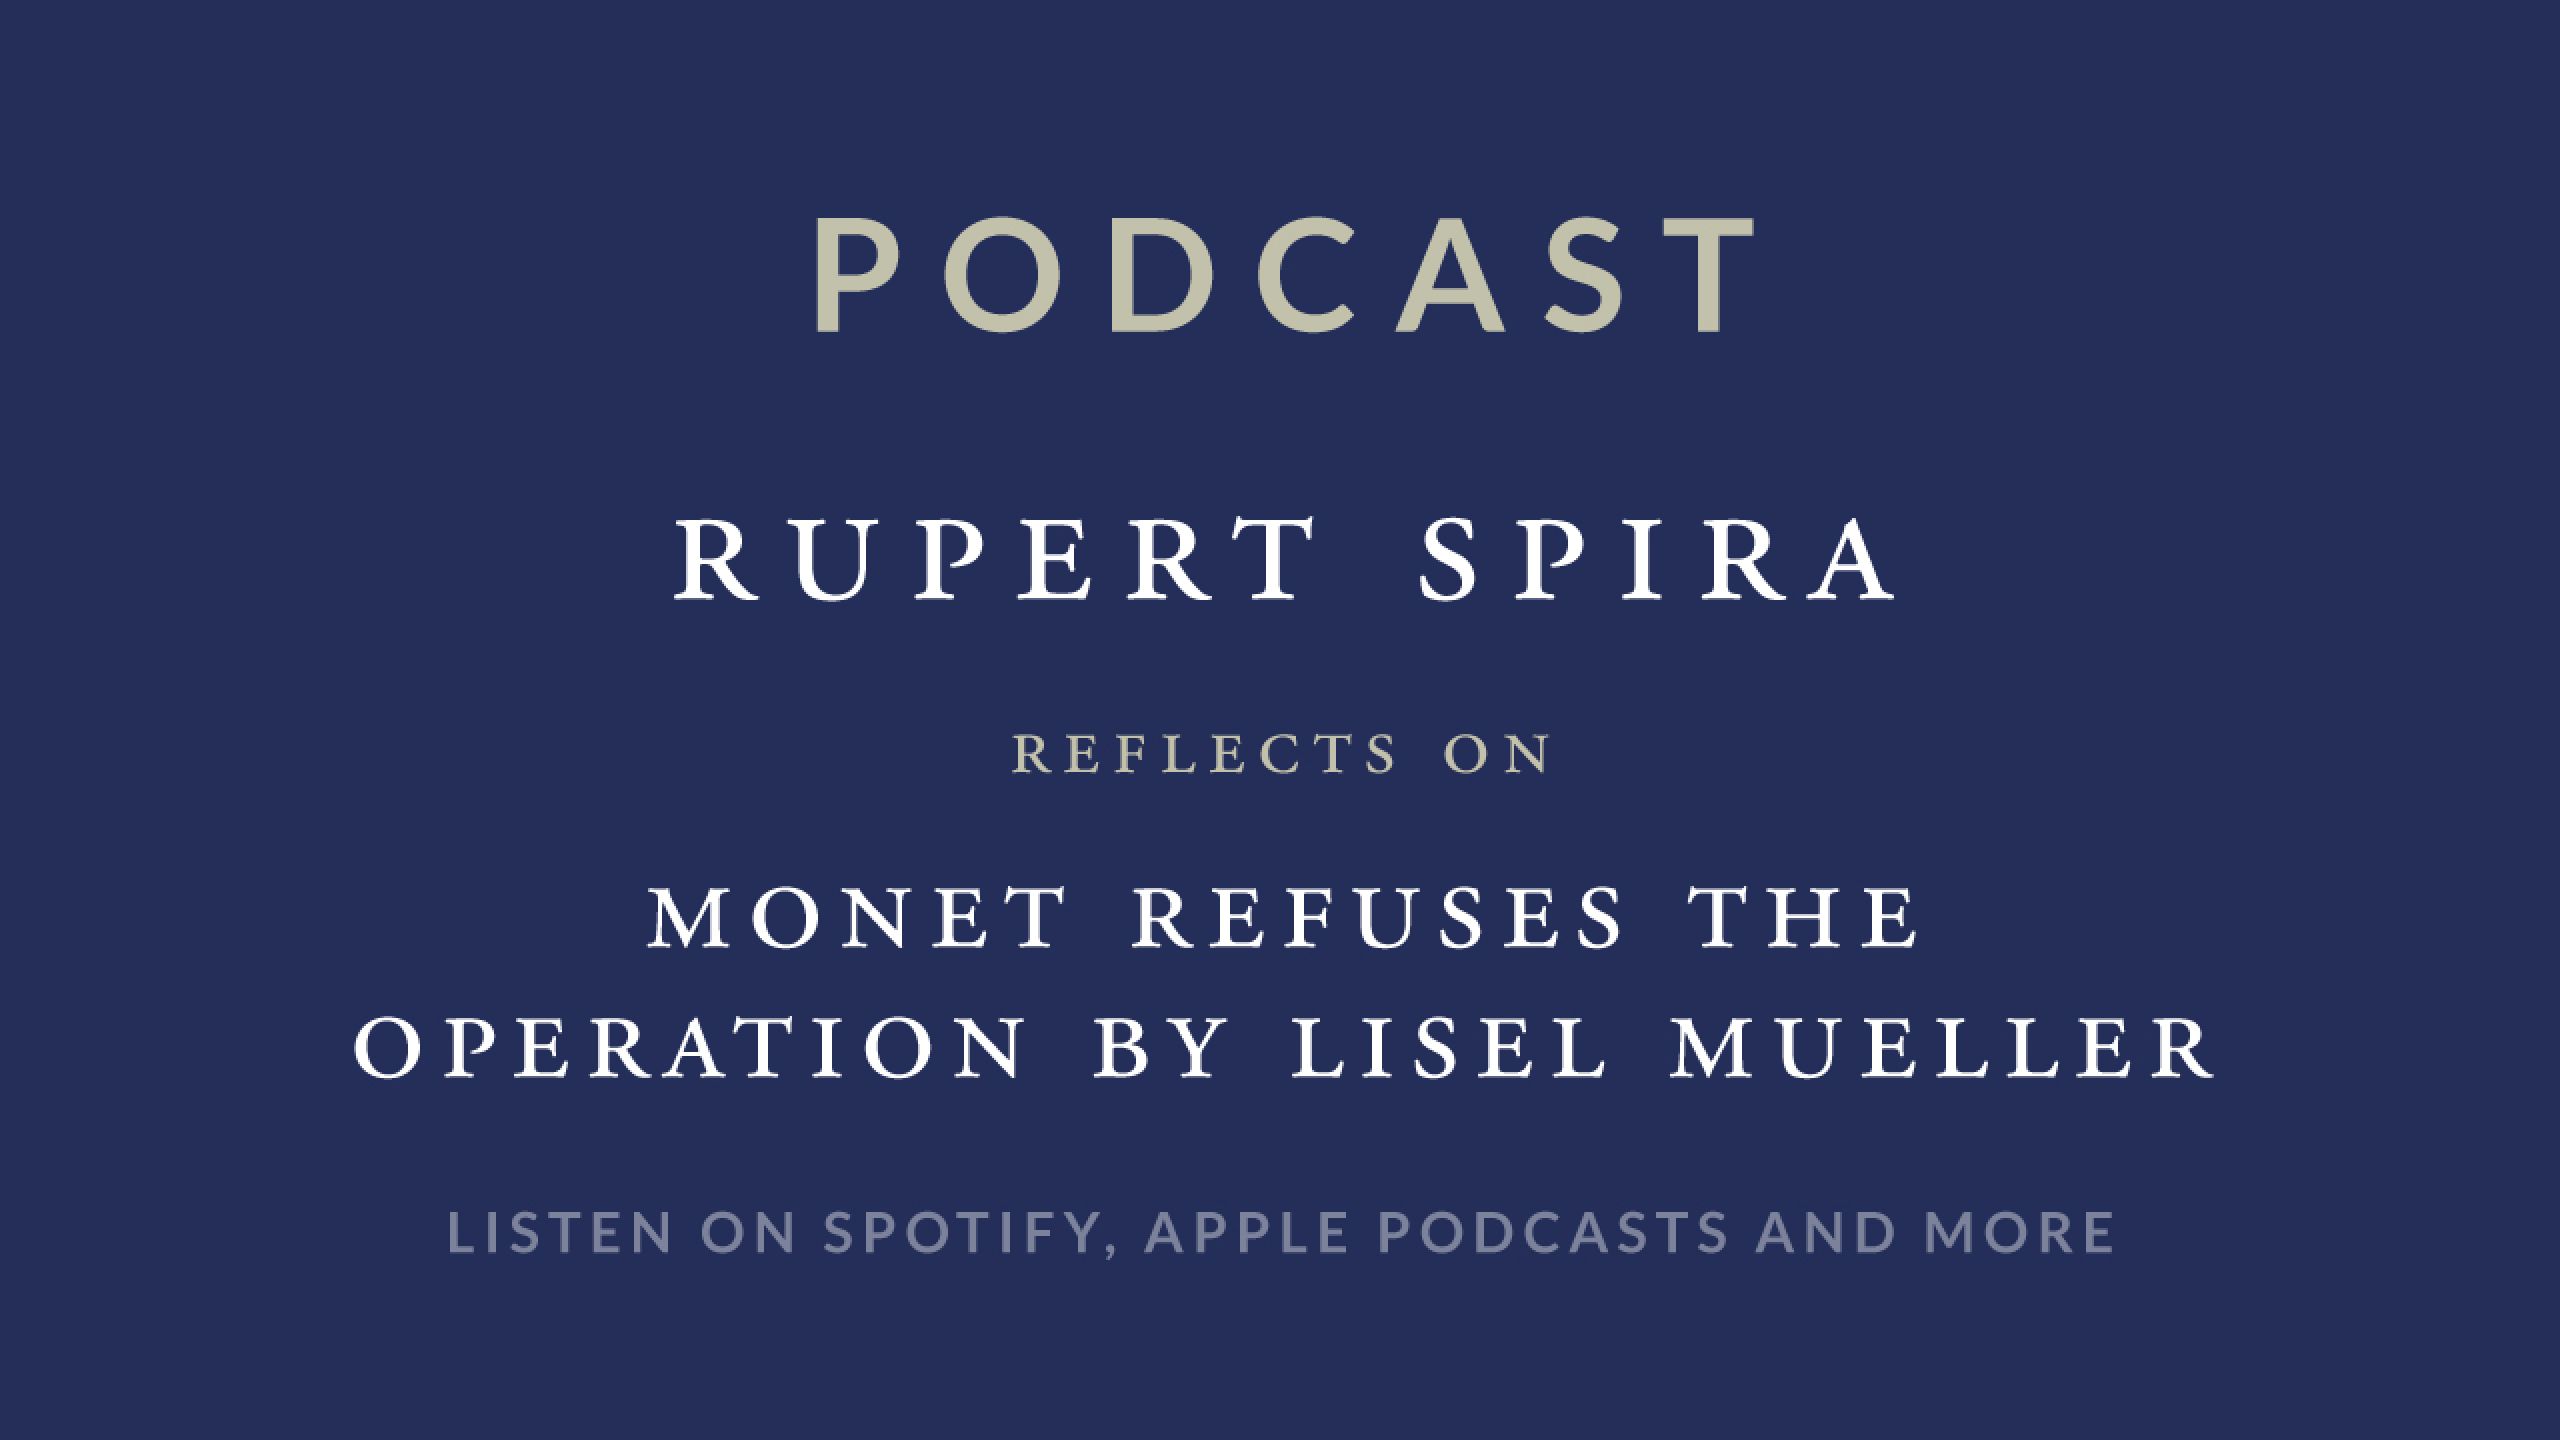 Rupert Spira Podcast: Reflections on 'Monet Refuses the Operation'